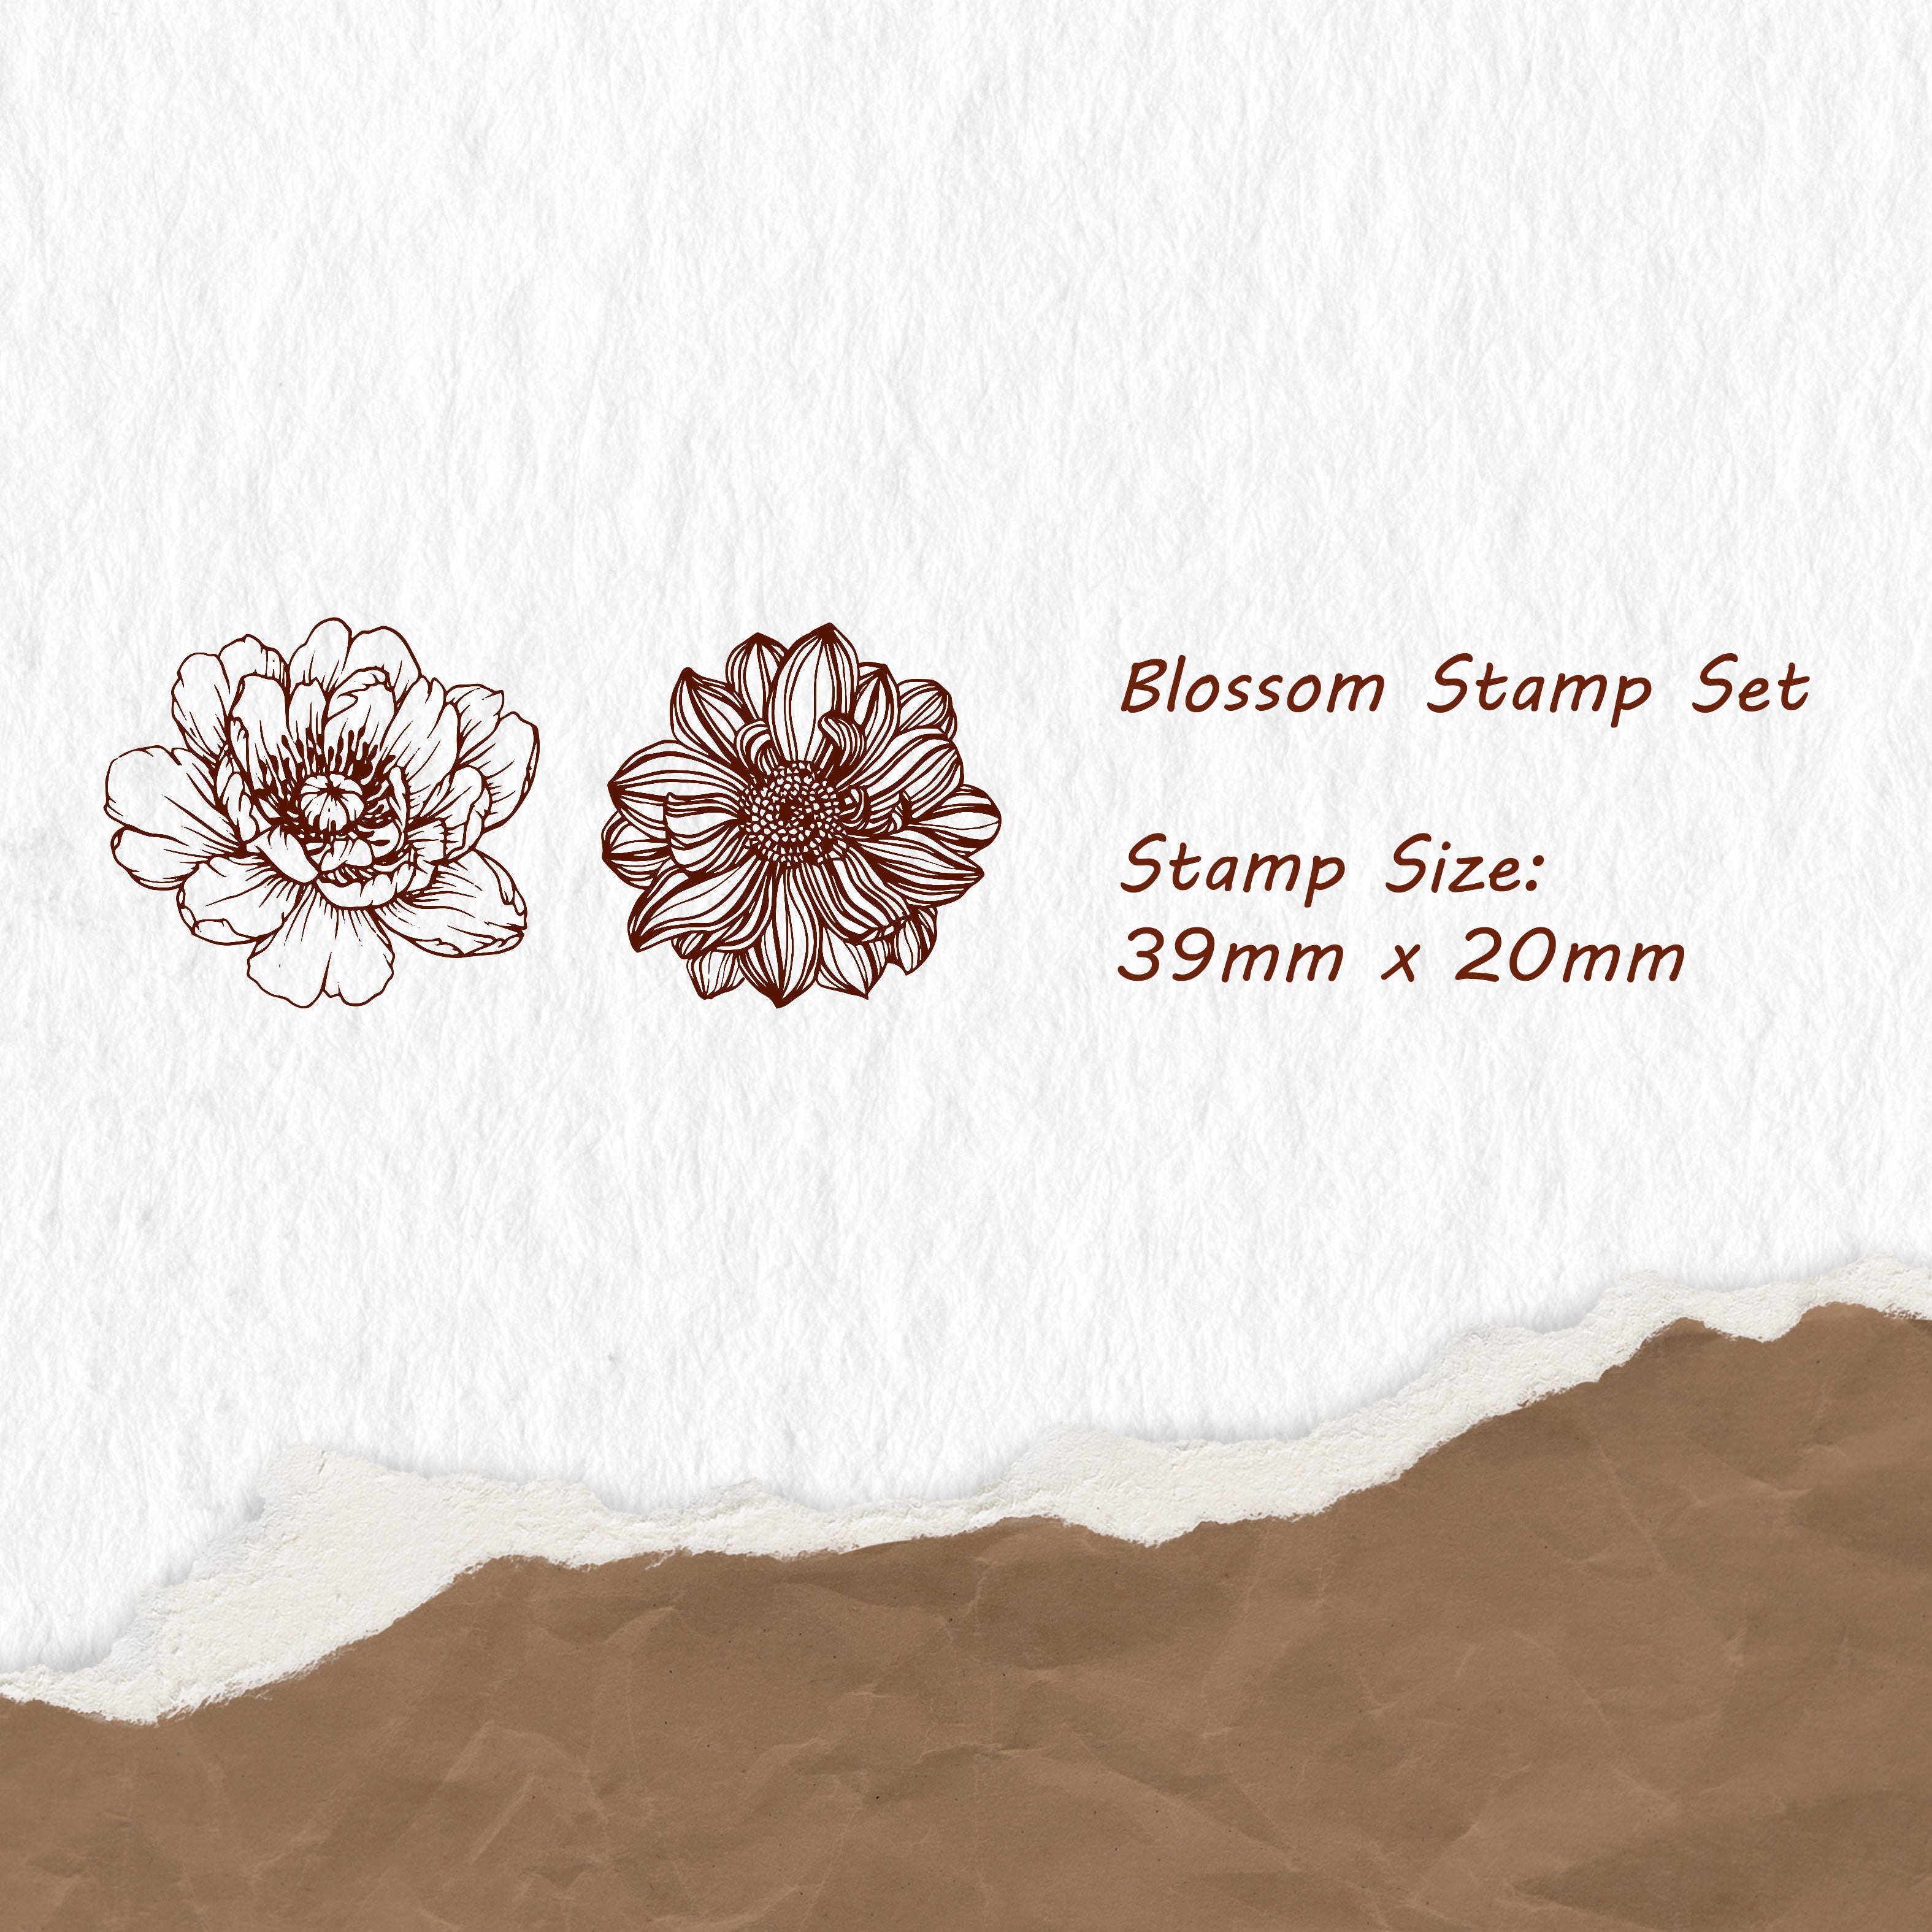 Blossom Stamp Set | The Washi Tape Shop. Beautiful Washi and Decorative Tape For Bullet Journals, Gift Wrapping, Planner Decoration and DIY Projects